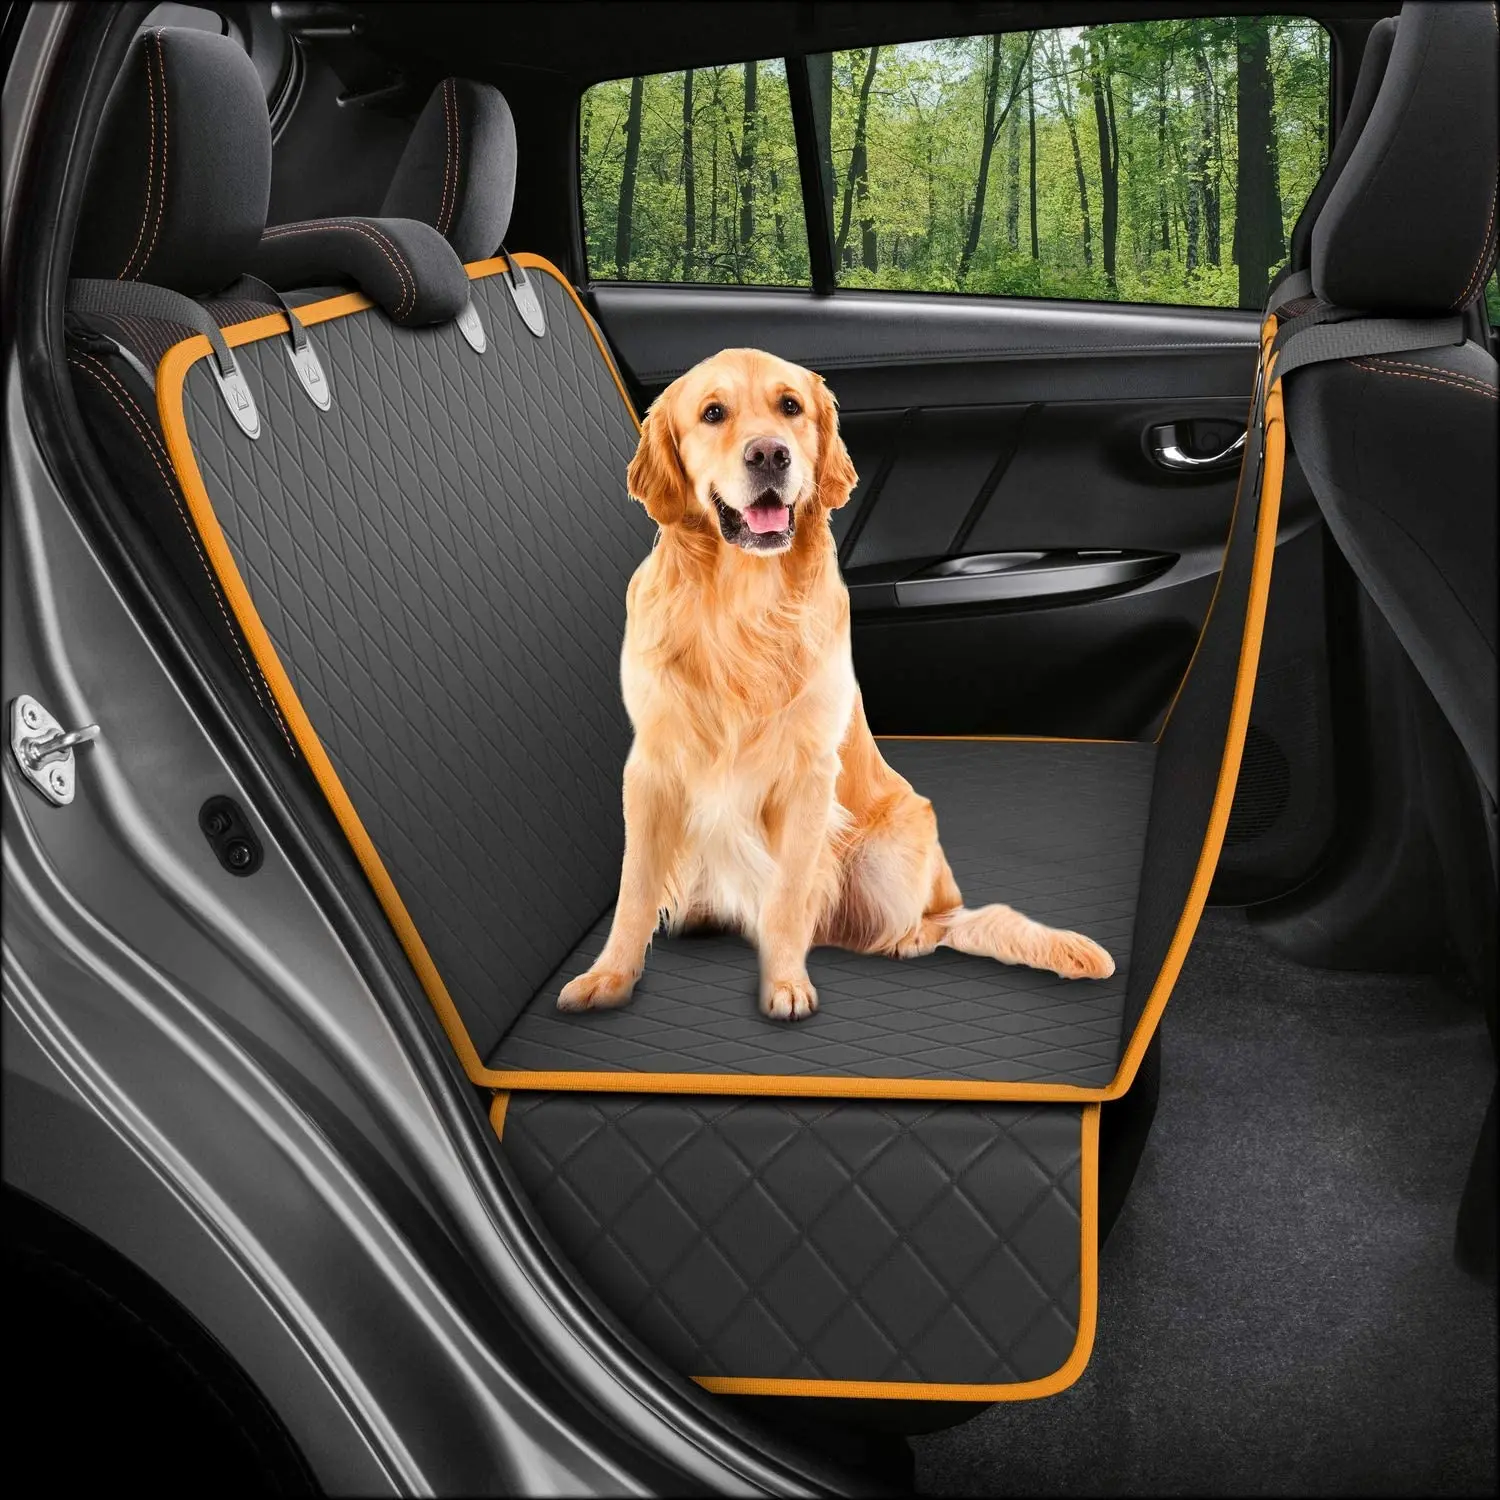 Jptuotu Universal Polyester Thickening Waterproof Secure Pet Dog Seat Cover Car Back Seat Protector Pet Dog Cat Cover Mat Hammock 130*150*55 cm 